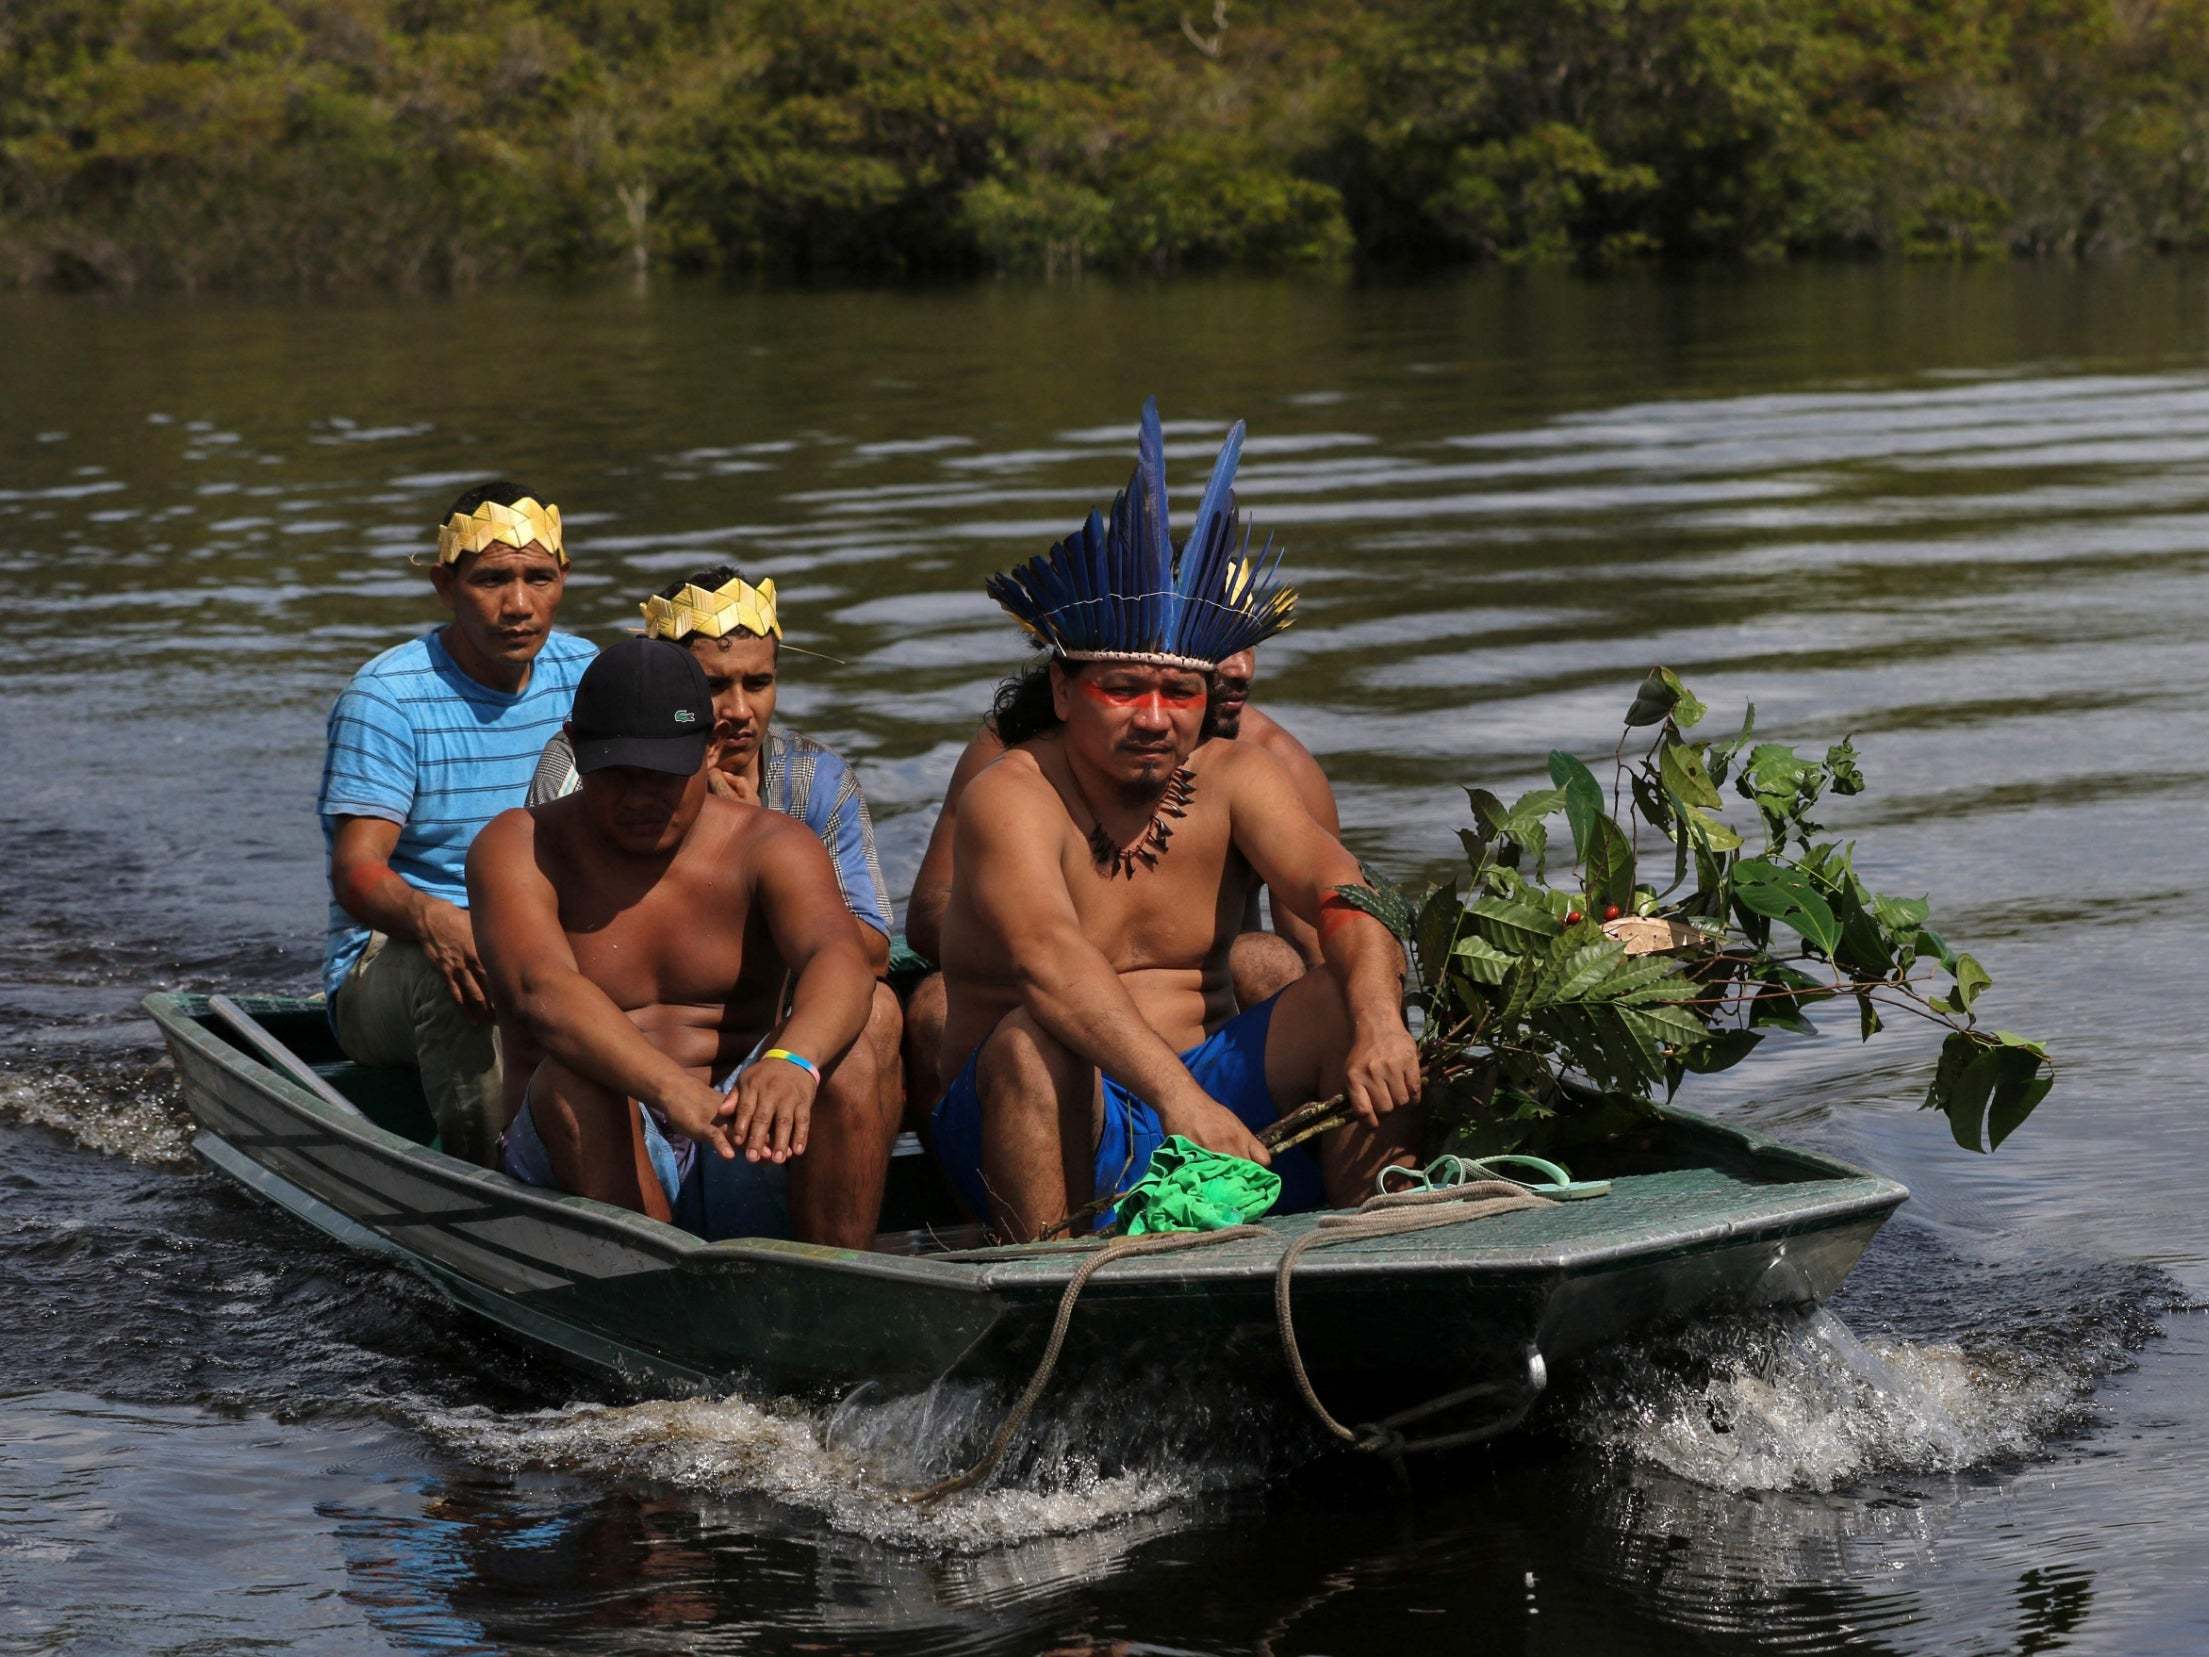 Tribal leader Andre Satere and other members of the community return home after gathering medicinal plants in the Amazon rainforest.